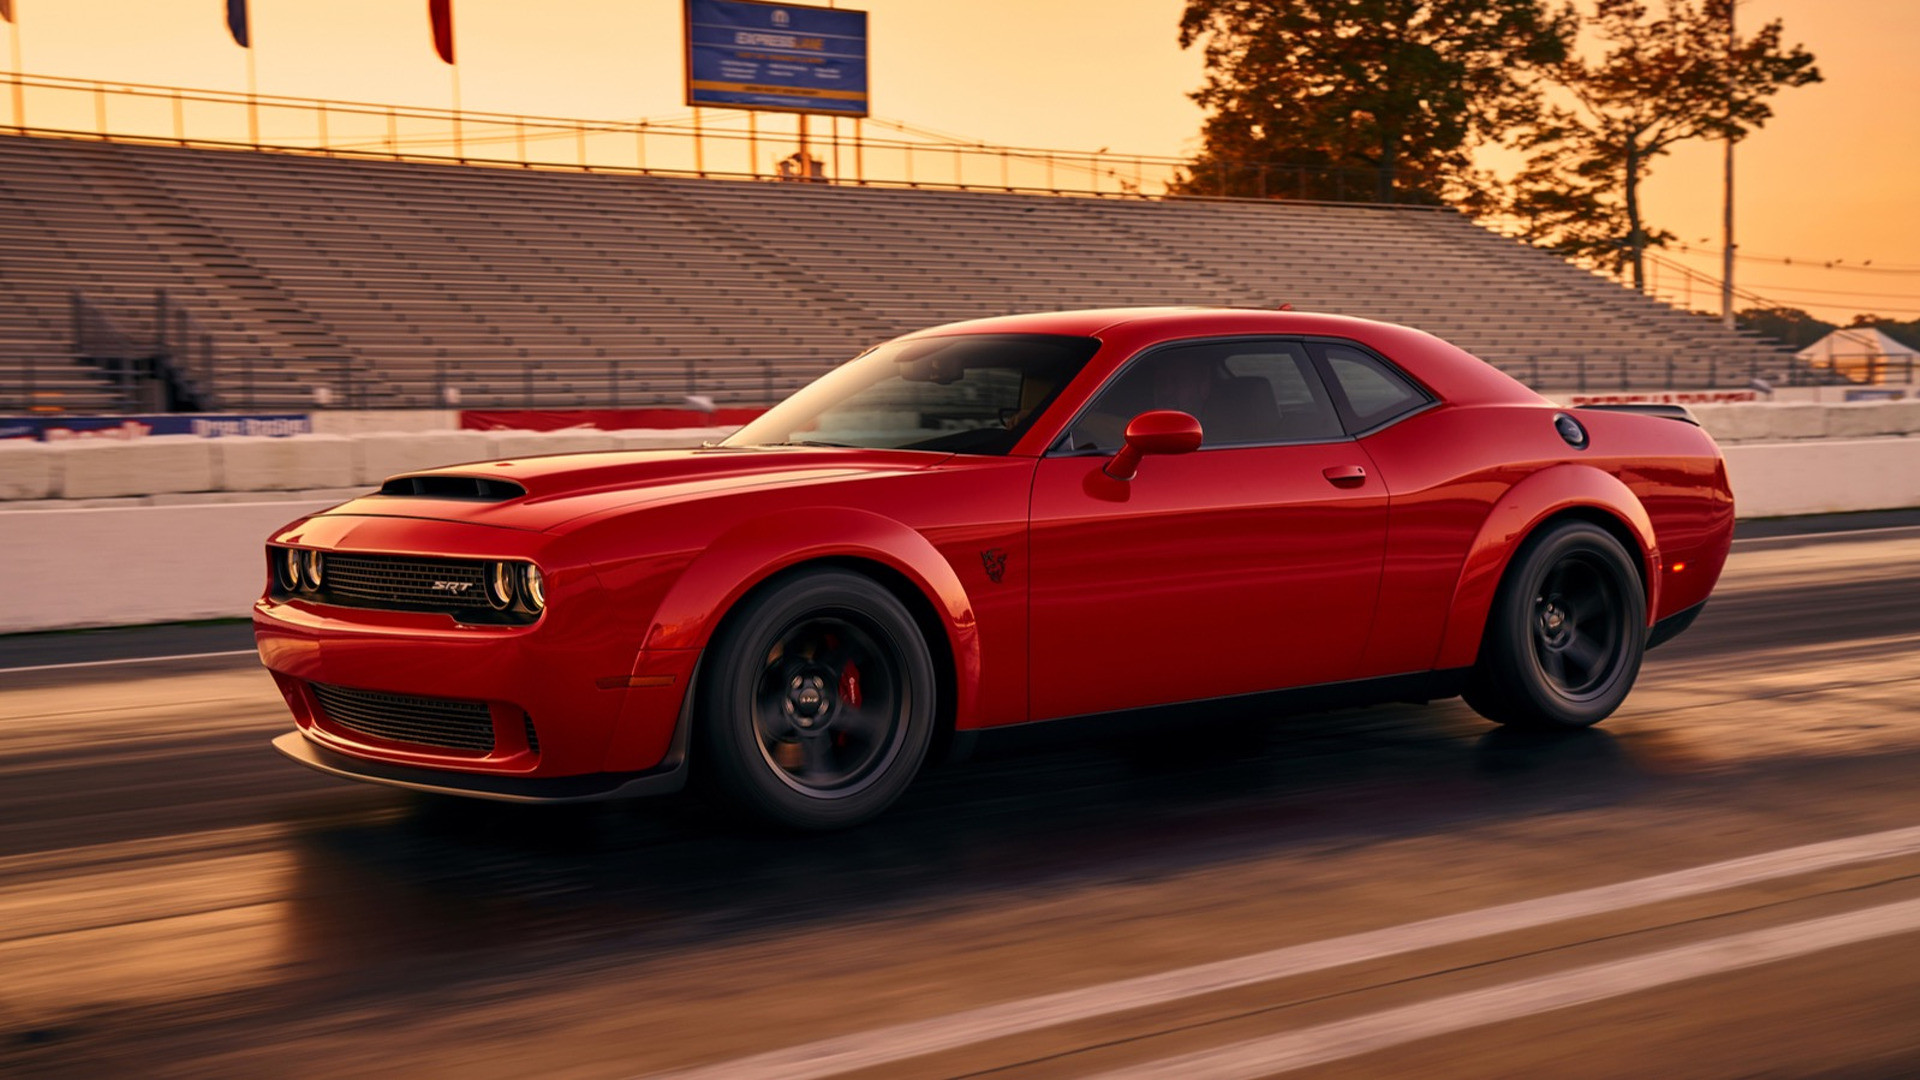 1920x1080 2018 Dodge Demon Leaked Image: Will It Have Over 1,000 HP? Revealed Apr 11th